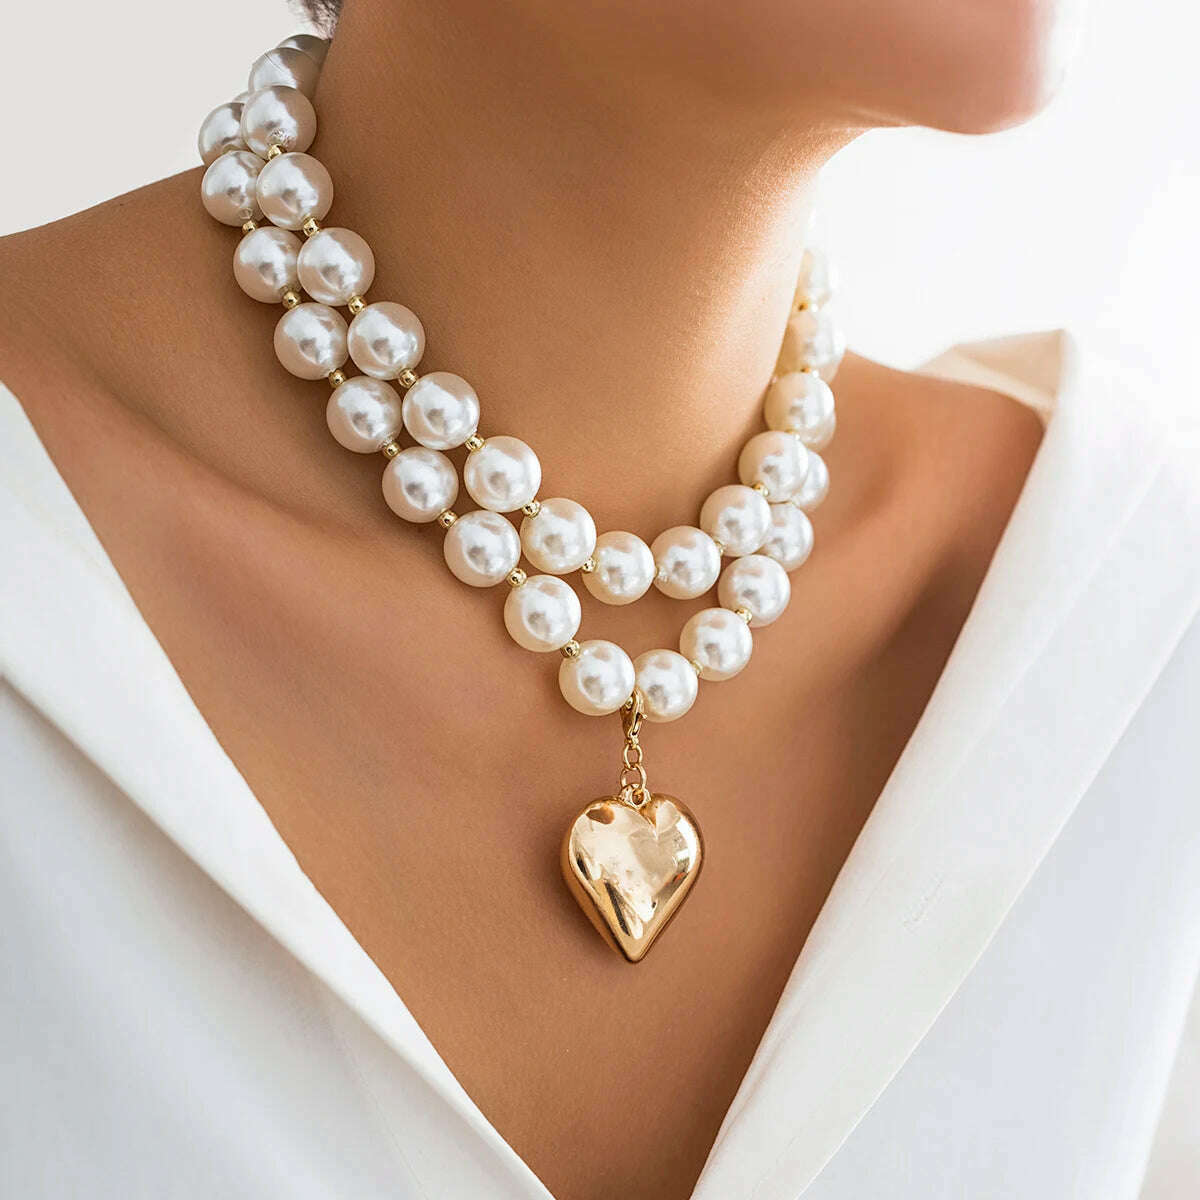 KIMLUD, Big Imitation Pearl Beads Layered Chains with Heart Pendant Necklace for Women Trendy Wedding Ladies Accessories on Neck Fashion, White, KIMLUD Womens Clothes